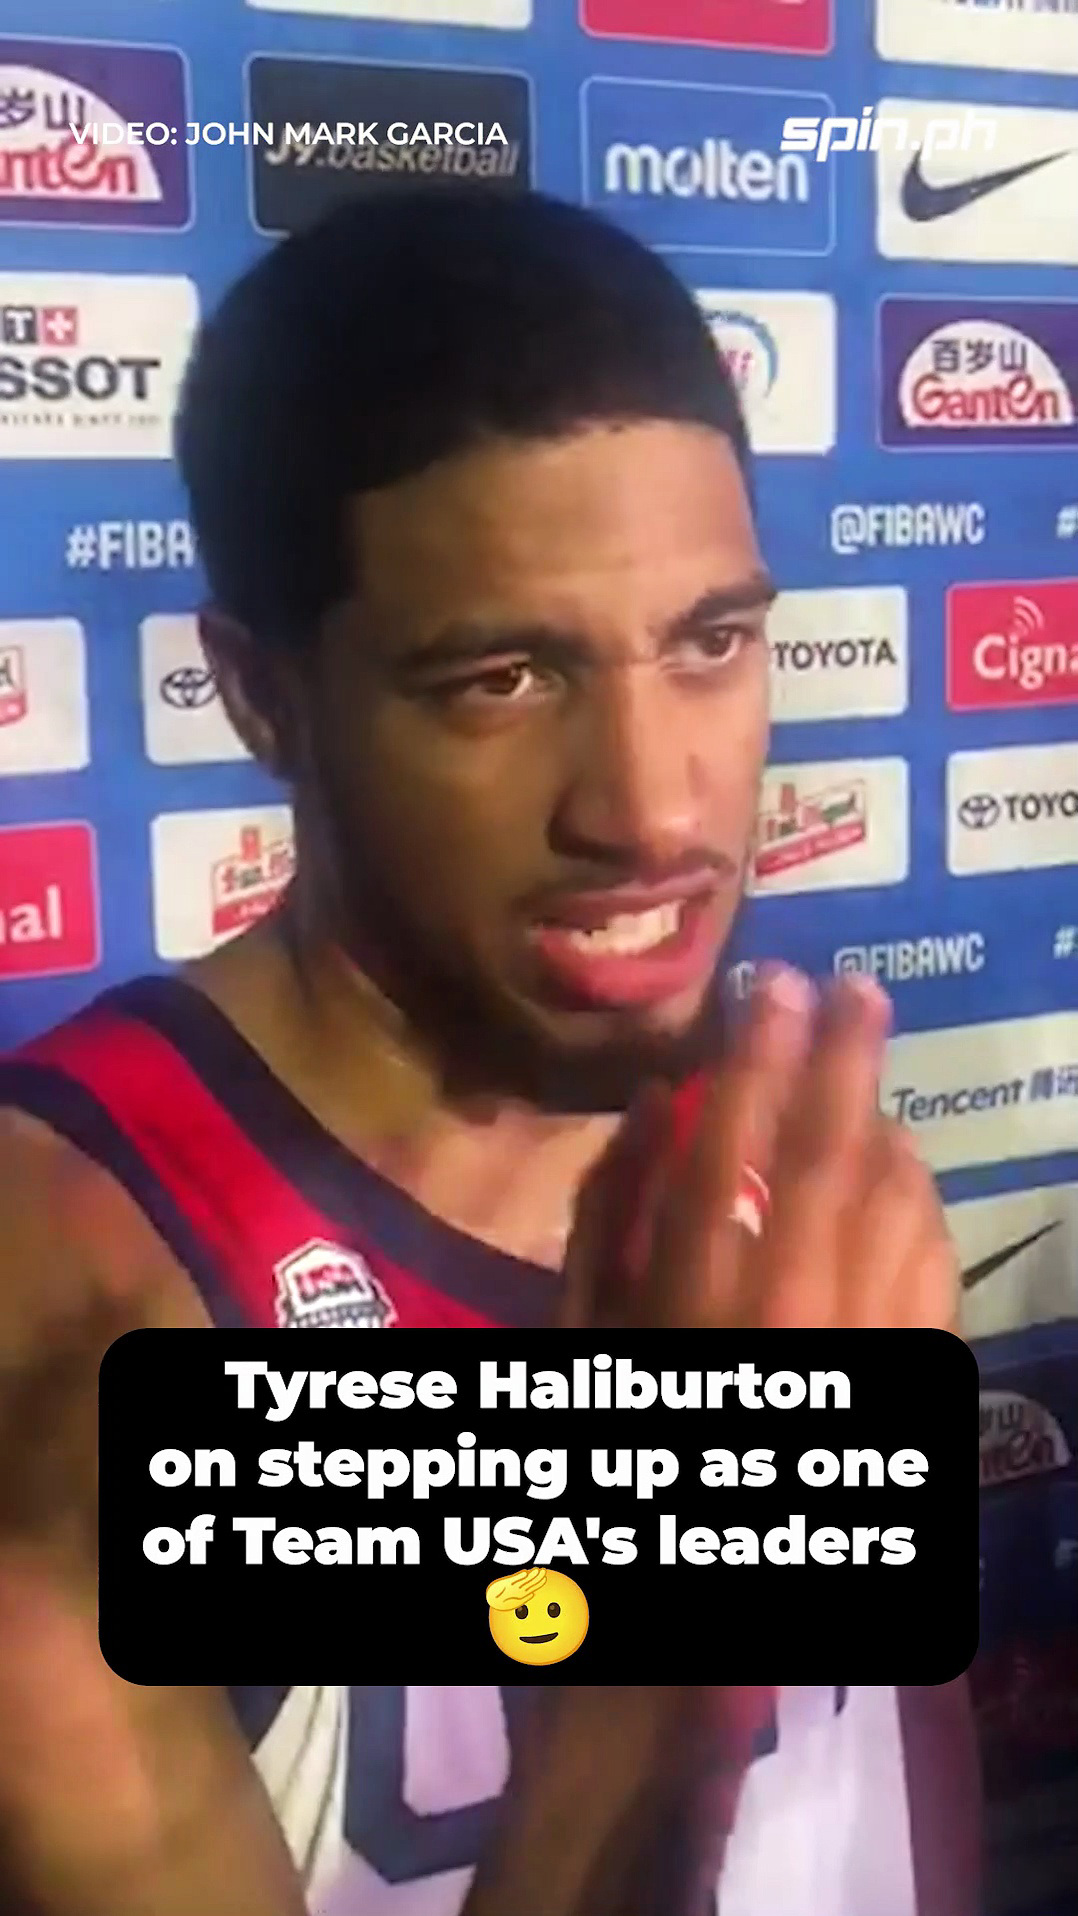 Tyrese Haliburton on being one of the leaders of Team USA FIBAWC